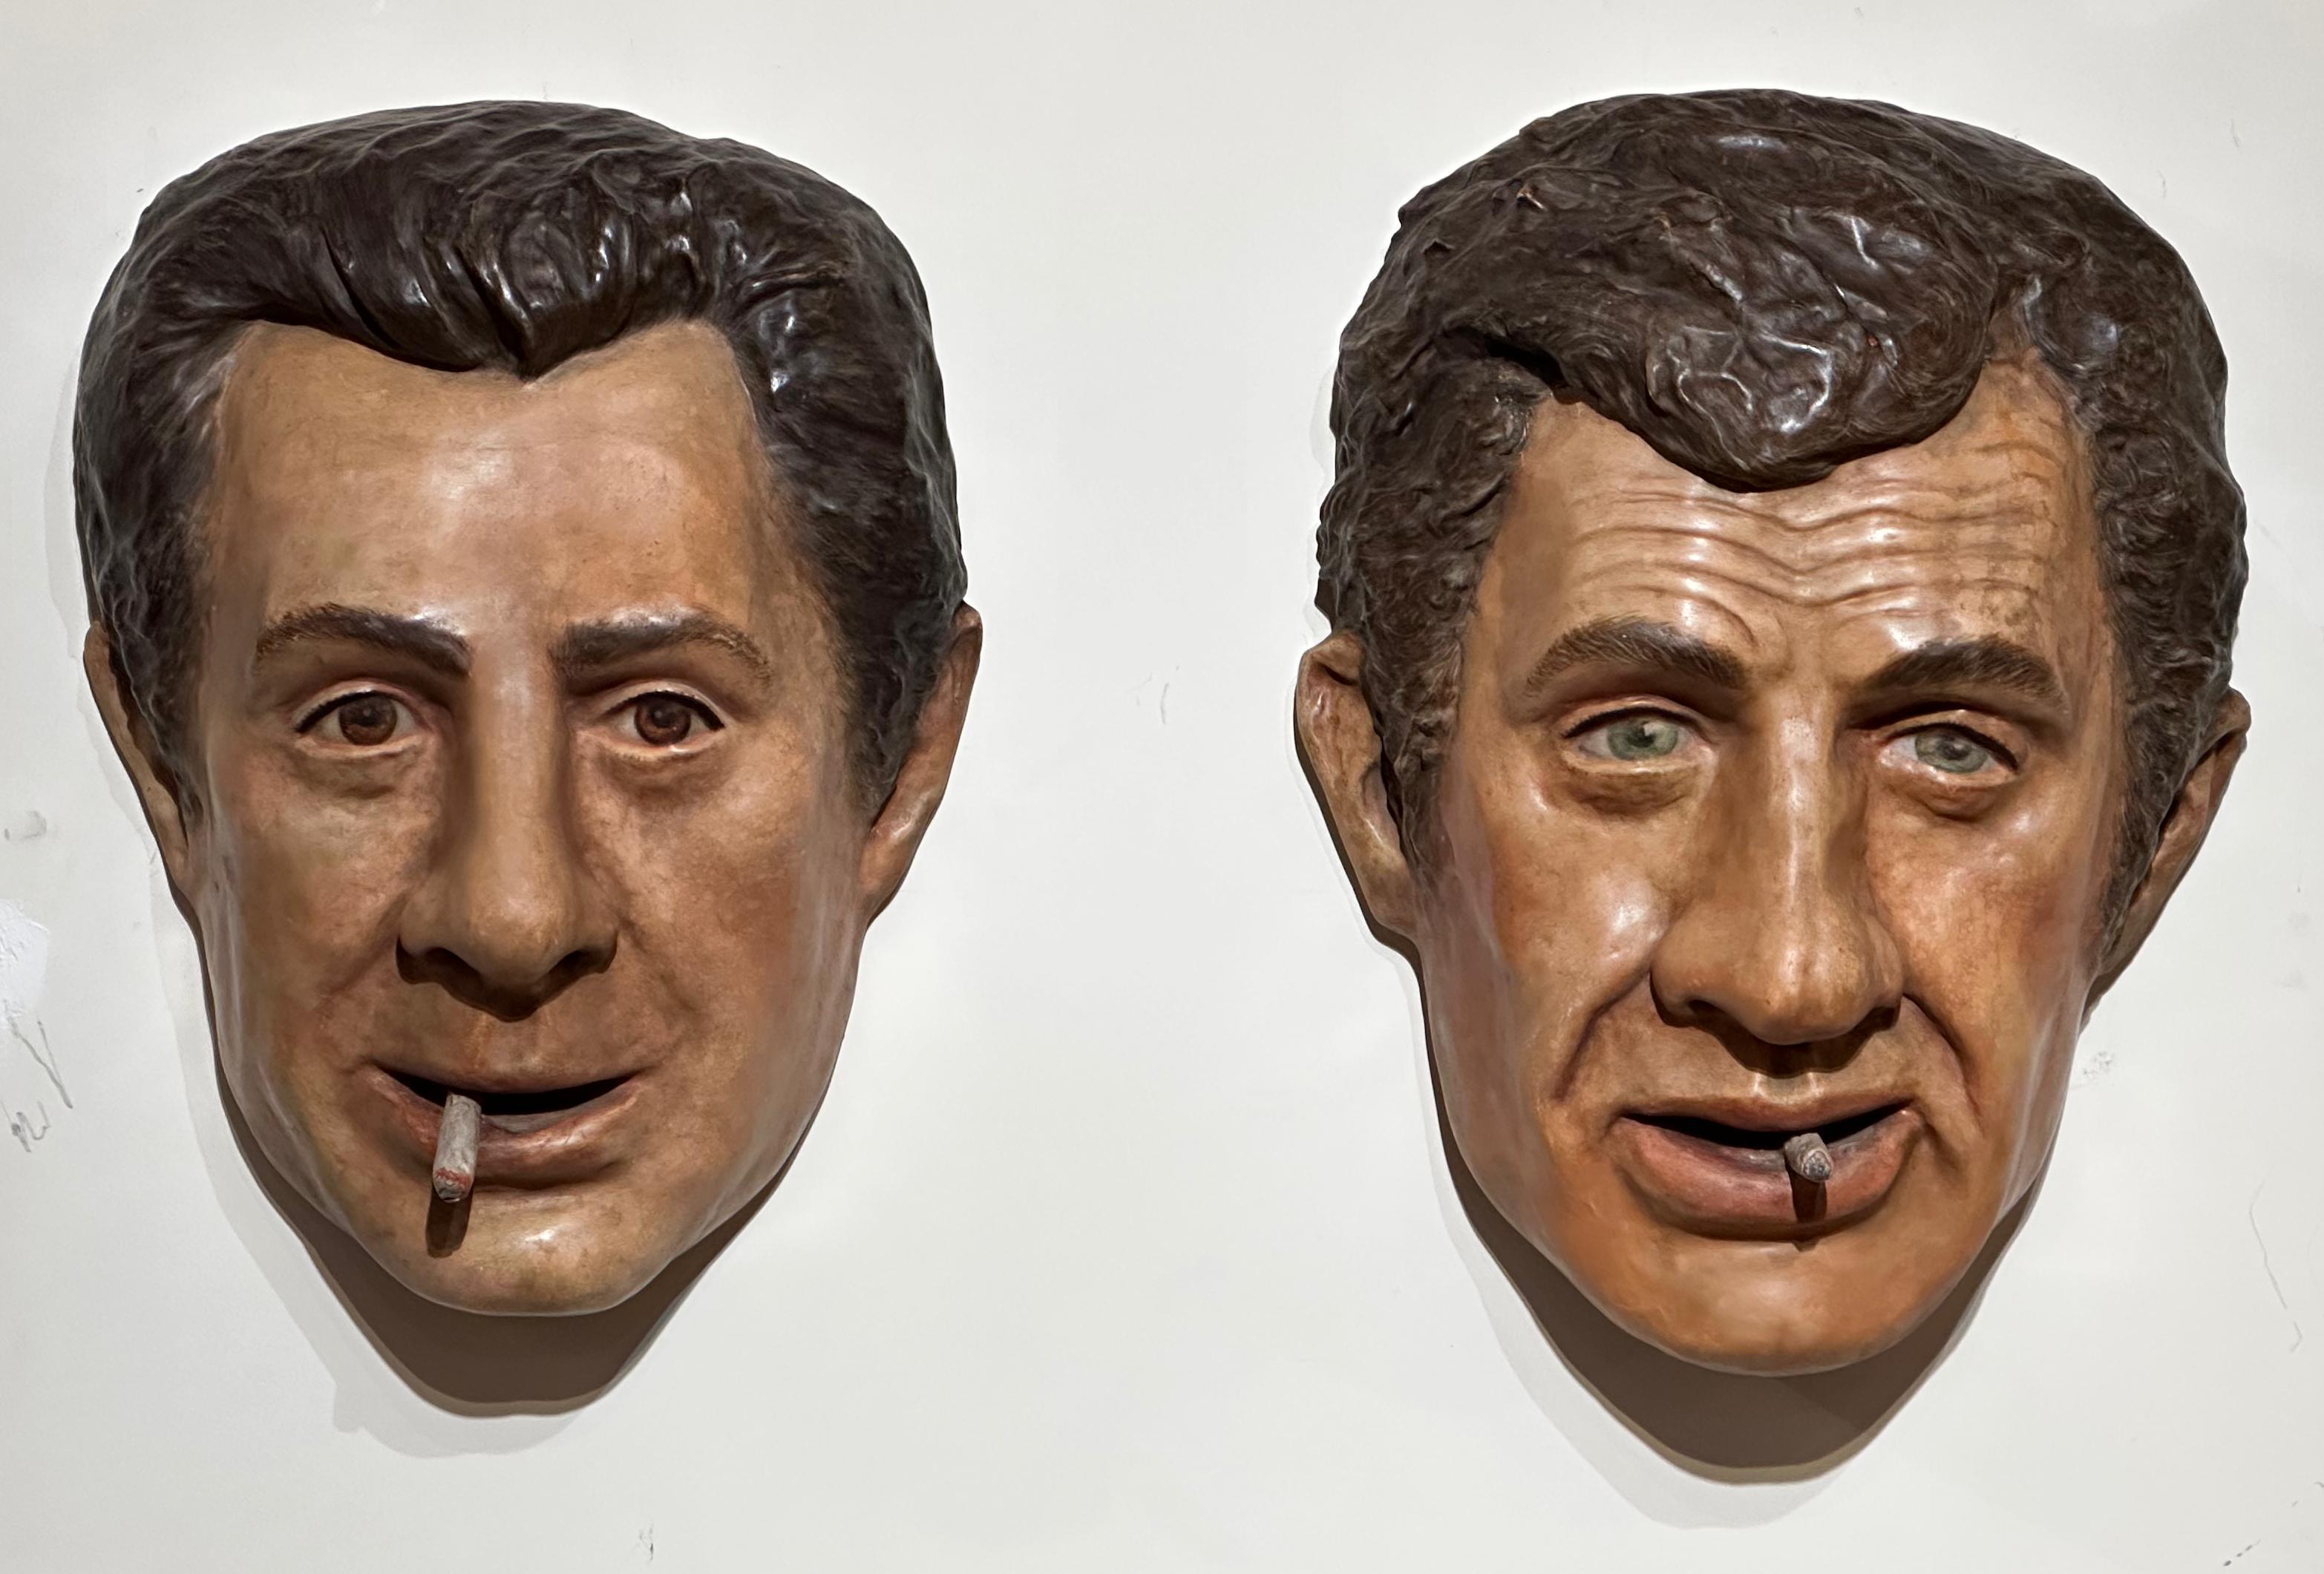 Original Hand Made Art Mask, a lifelike image of French actor Jean-Paul Belmondo. This mask is very dimensional with great artistic details and a natural finish. There is a fascination for smoking at the time which came through not only in the art